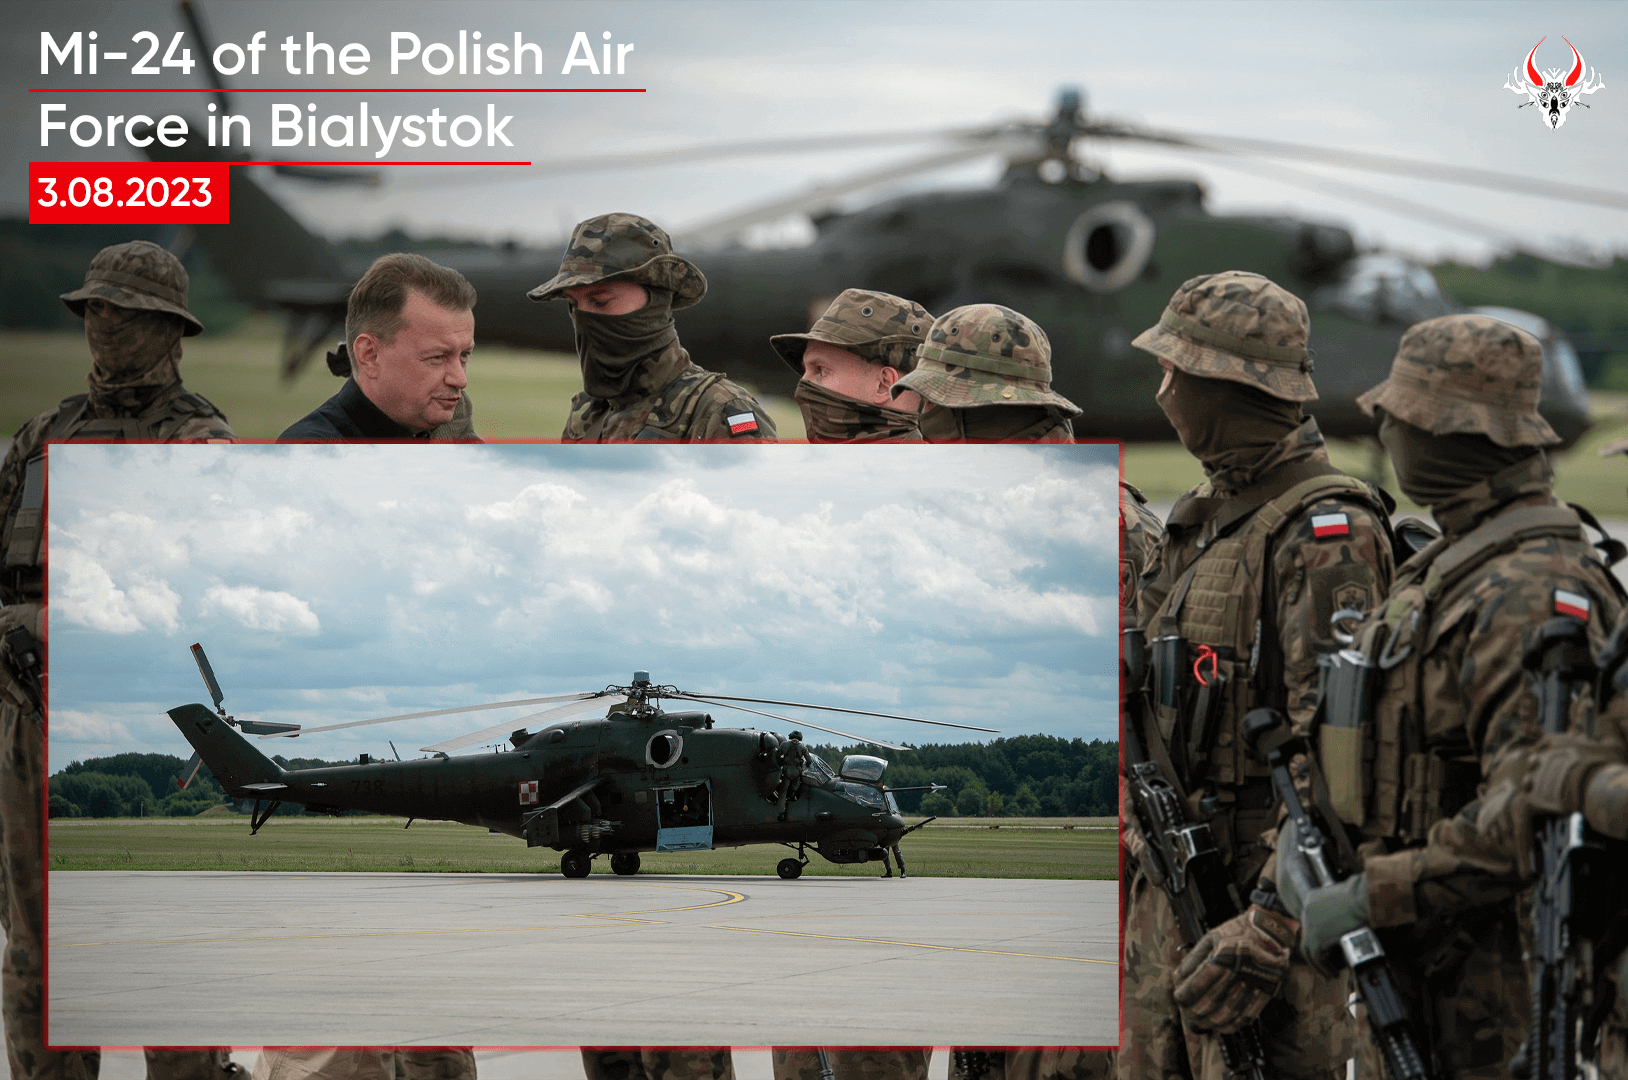 Mi-24 of the Polish Air Force in Bialystok